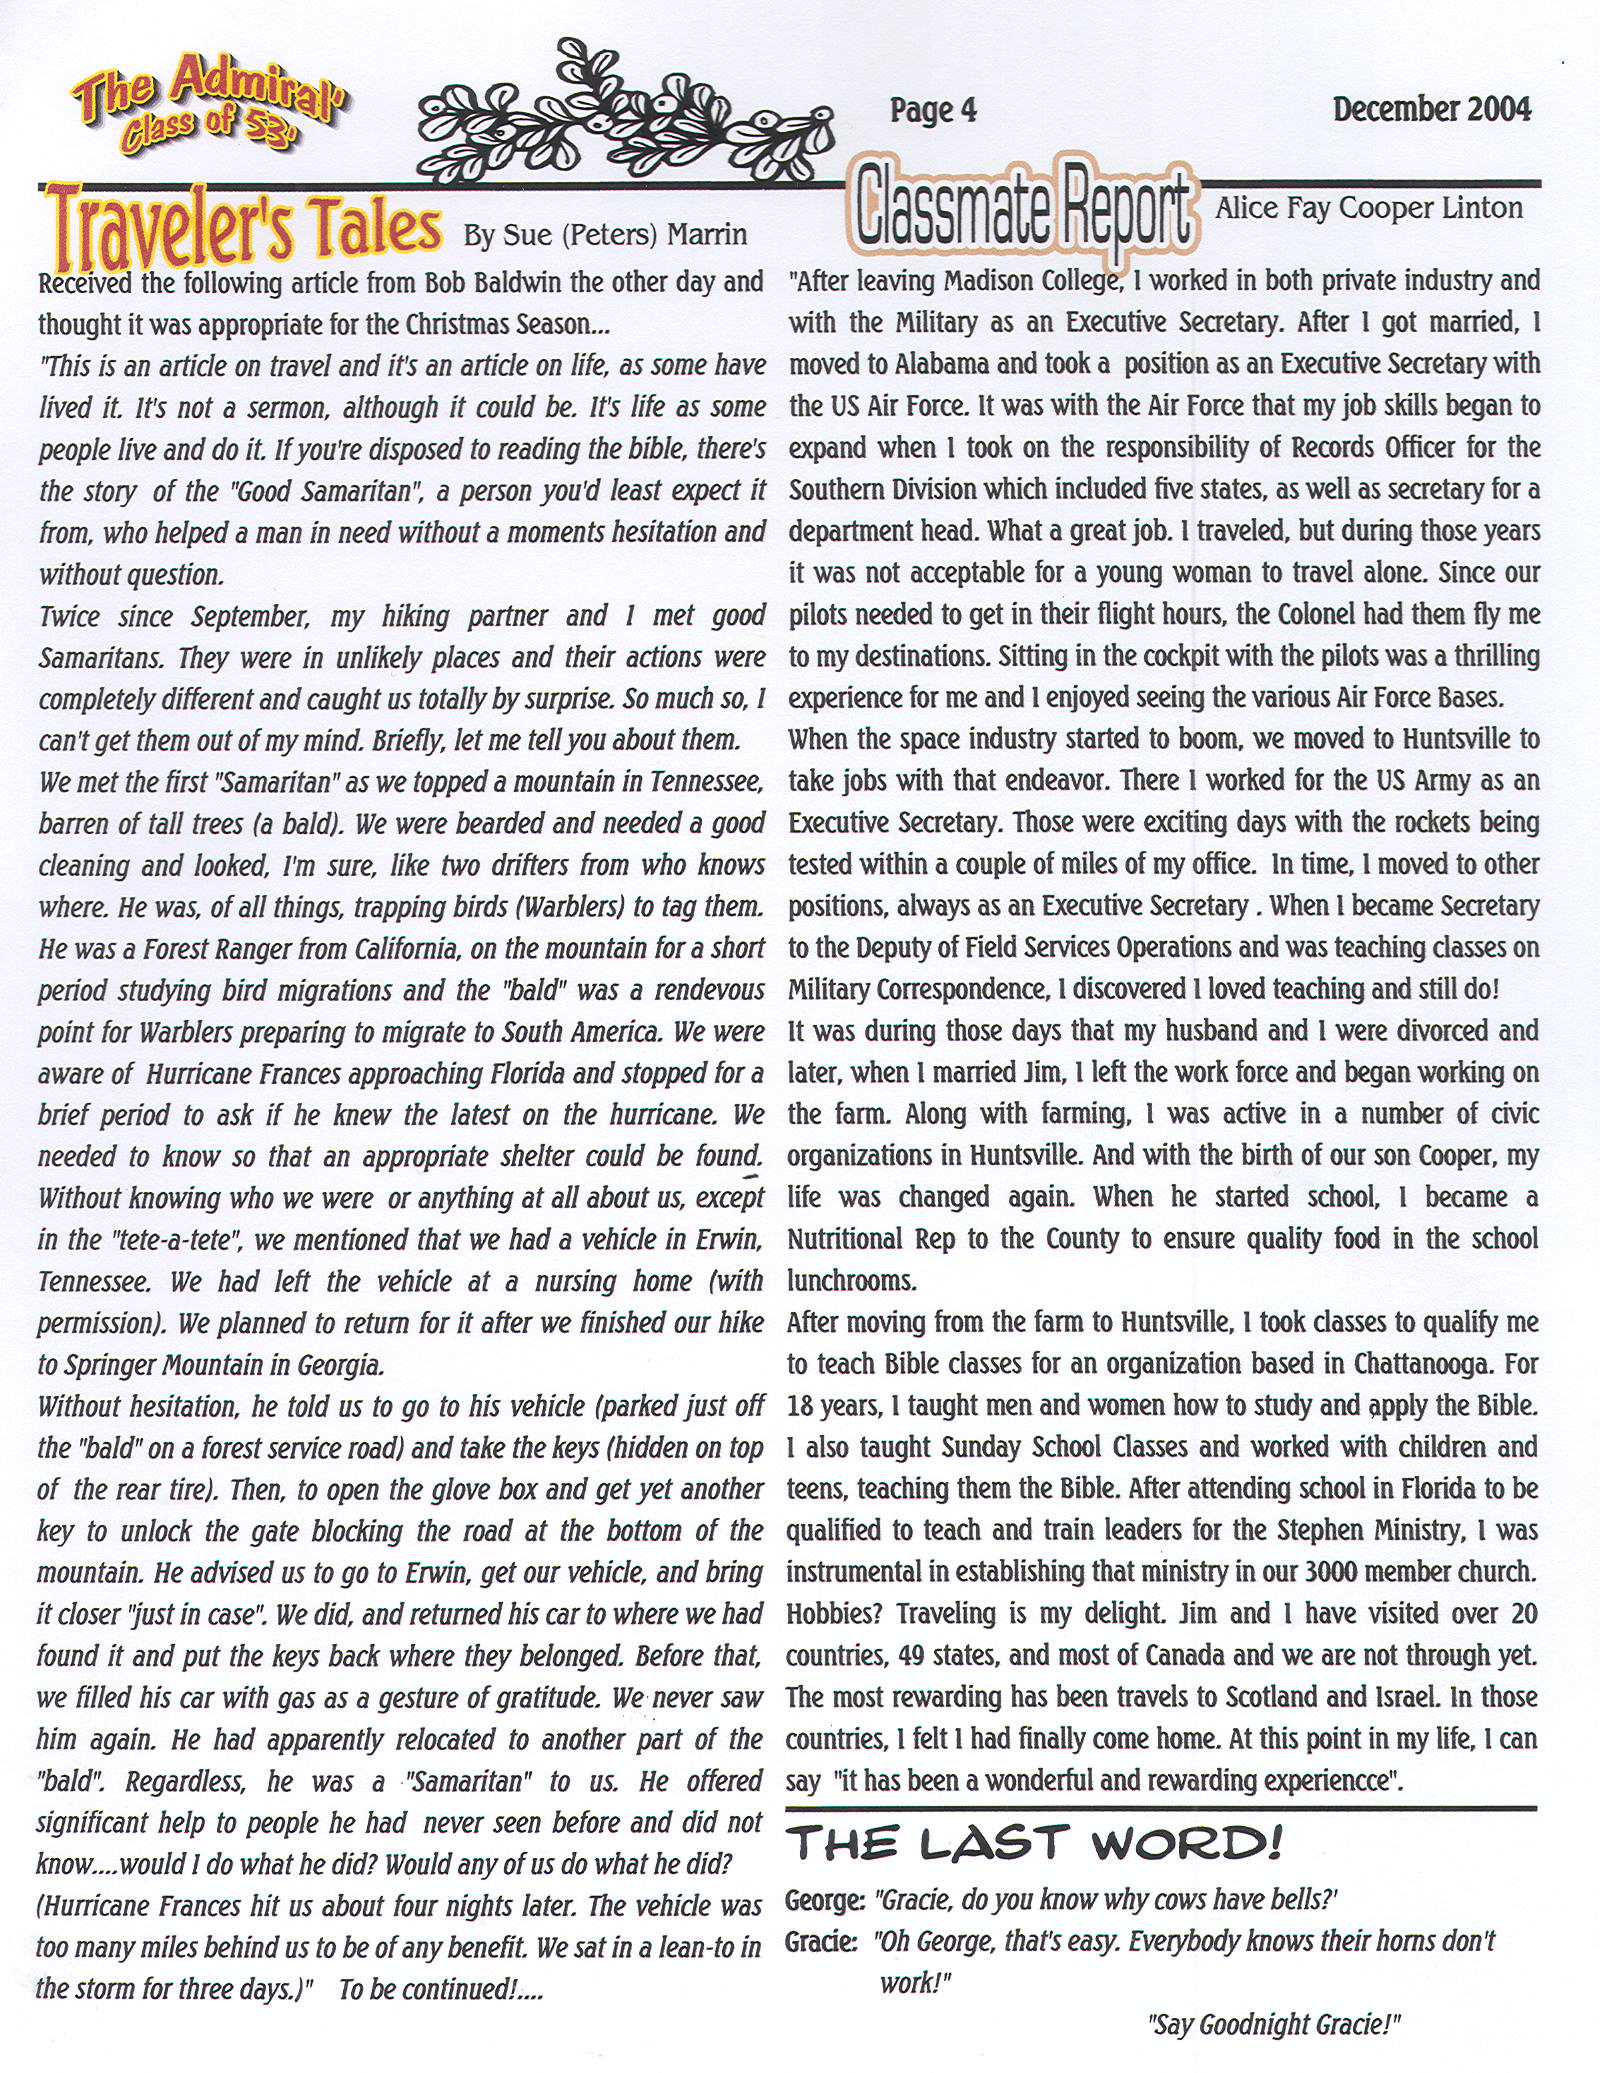 The Admiral - December 2004 - pg. 4